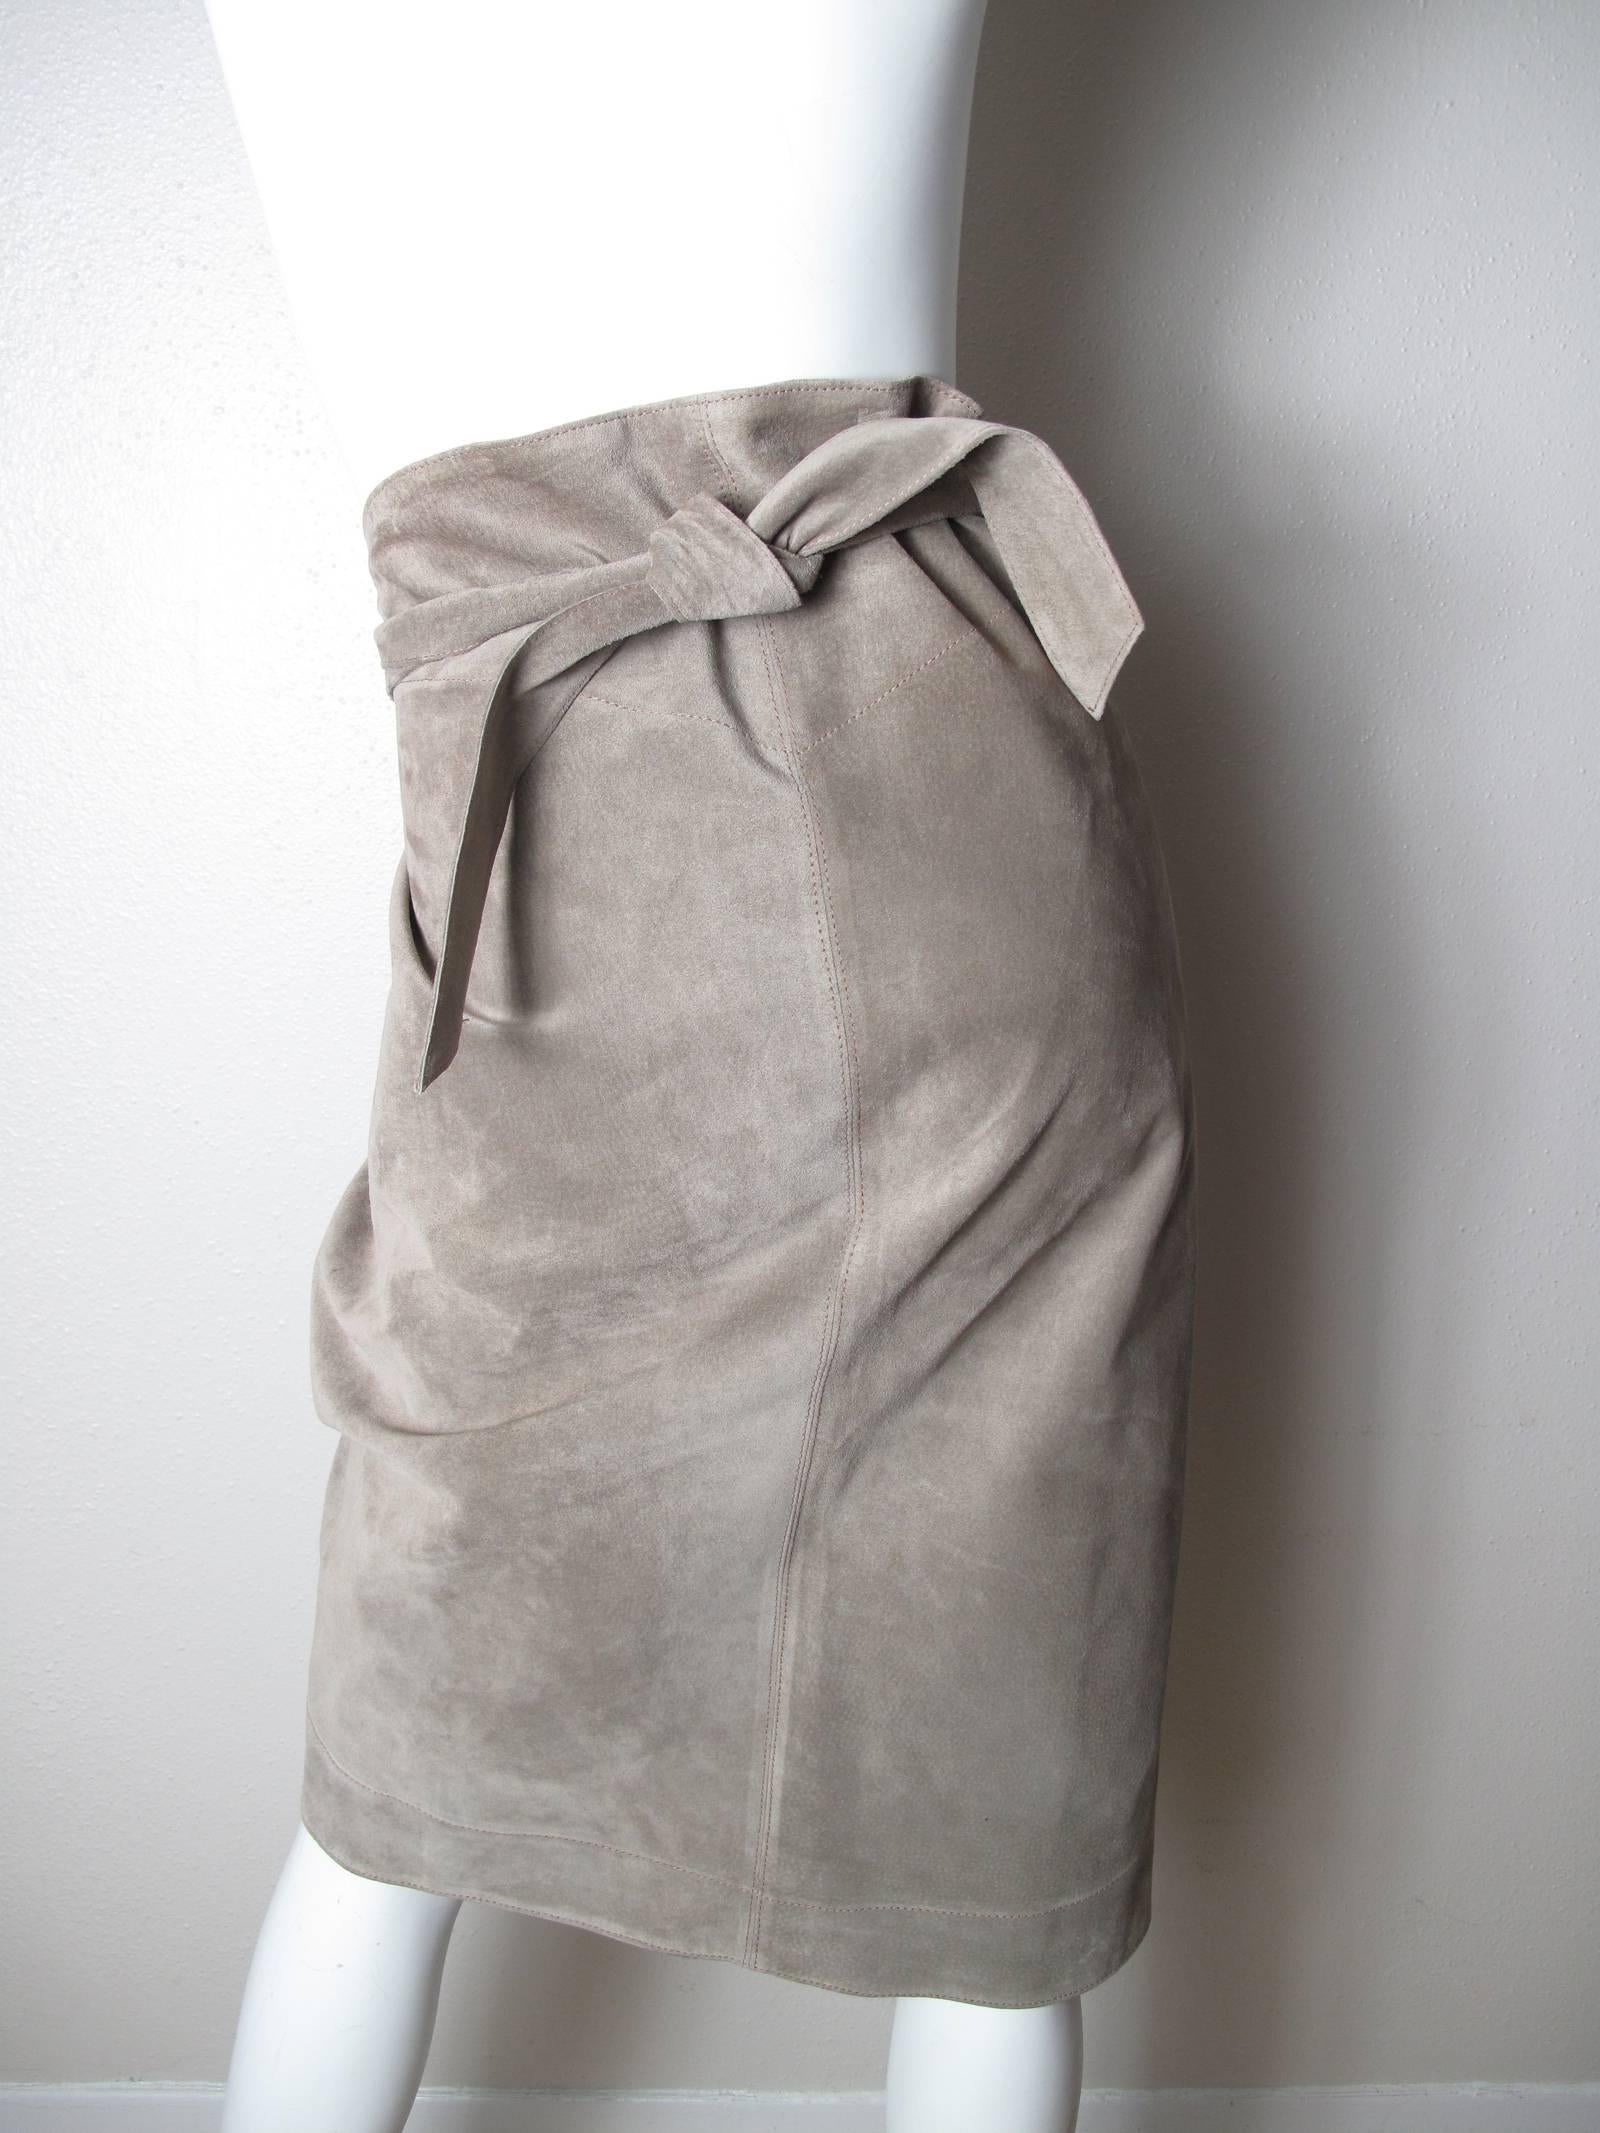 1990s Alaia tan suede wrap skirt. Size 40 / Or current US 6 - 8 
27 1/2" length. Condition: Very Good, some all over wear. 
We accept returns for refund, please see our terms.  We offer free Ground Shipping within the US.  Please let us know